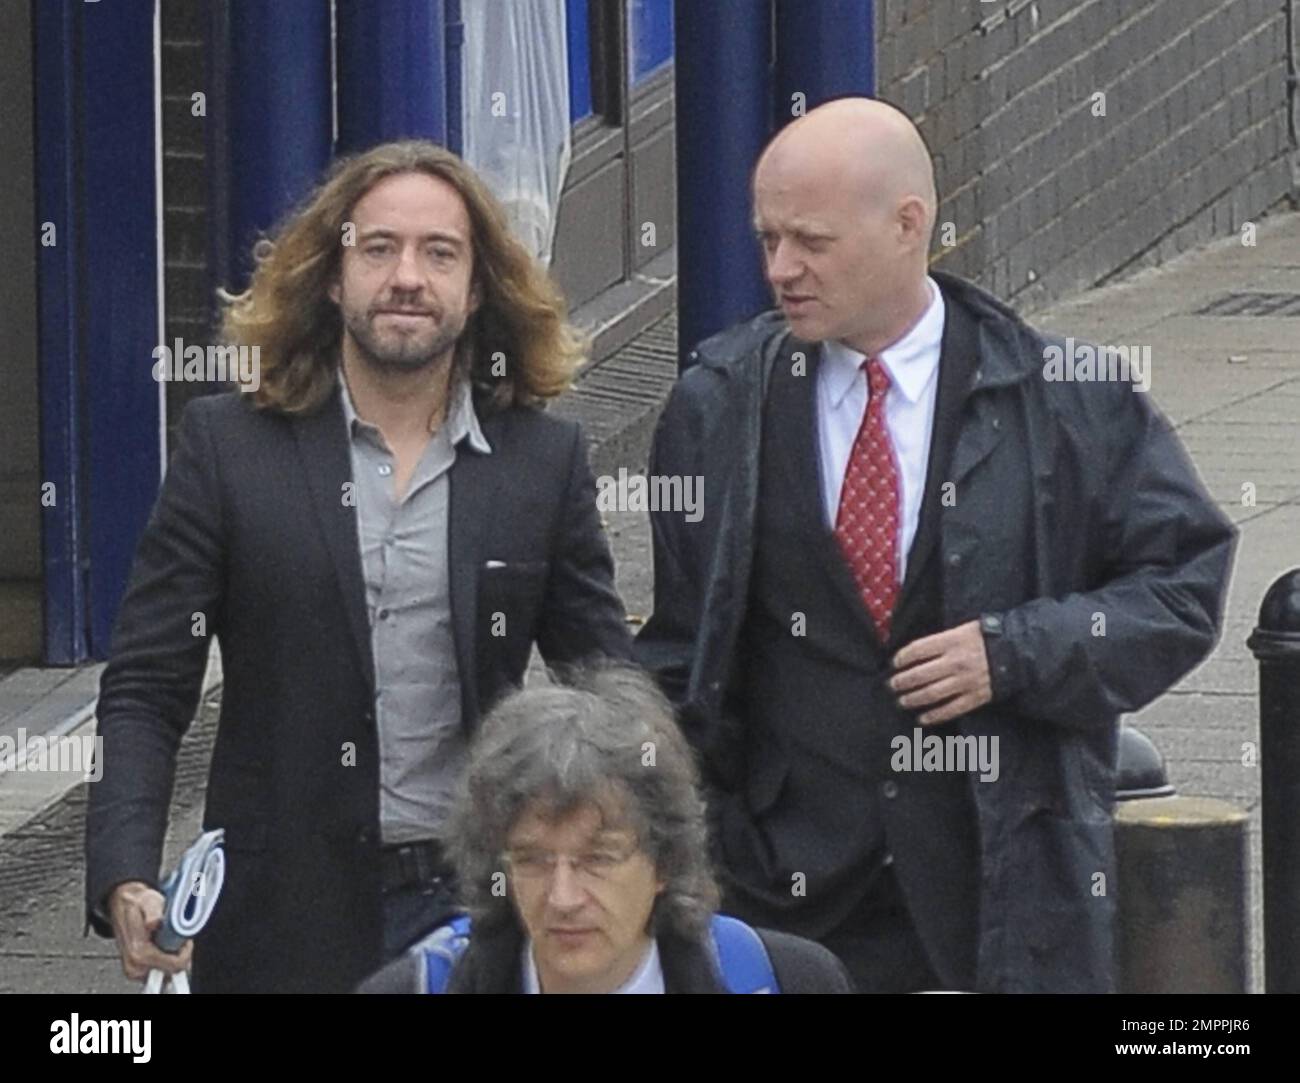 Justin Lee Collins was seen leaving St Albans Crown Court after the jurors were sent home due to one of them being ill. They jury is still deliberating on the harassment case against Collins brought upon by his ex-girlfriend Anna Larke. The jury is expected to return to court on Tuesday to continue deliberating. London, UK. 8th October 2012. Stock Photo